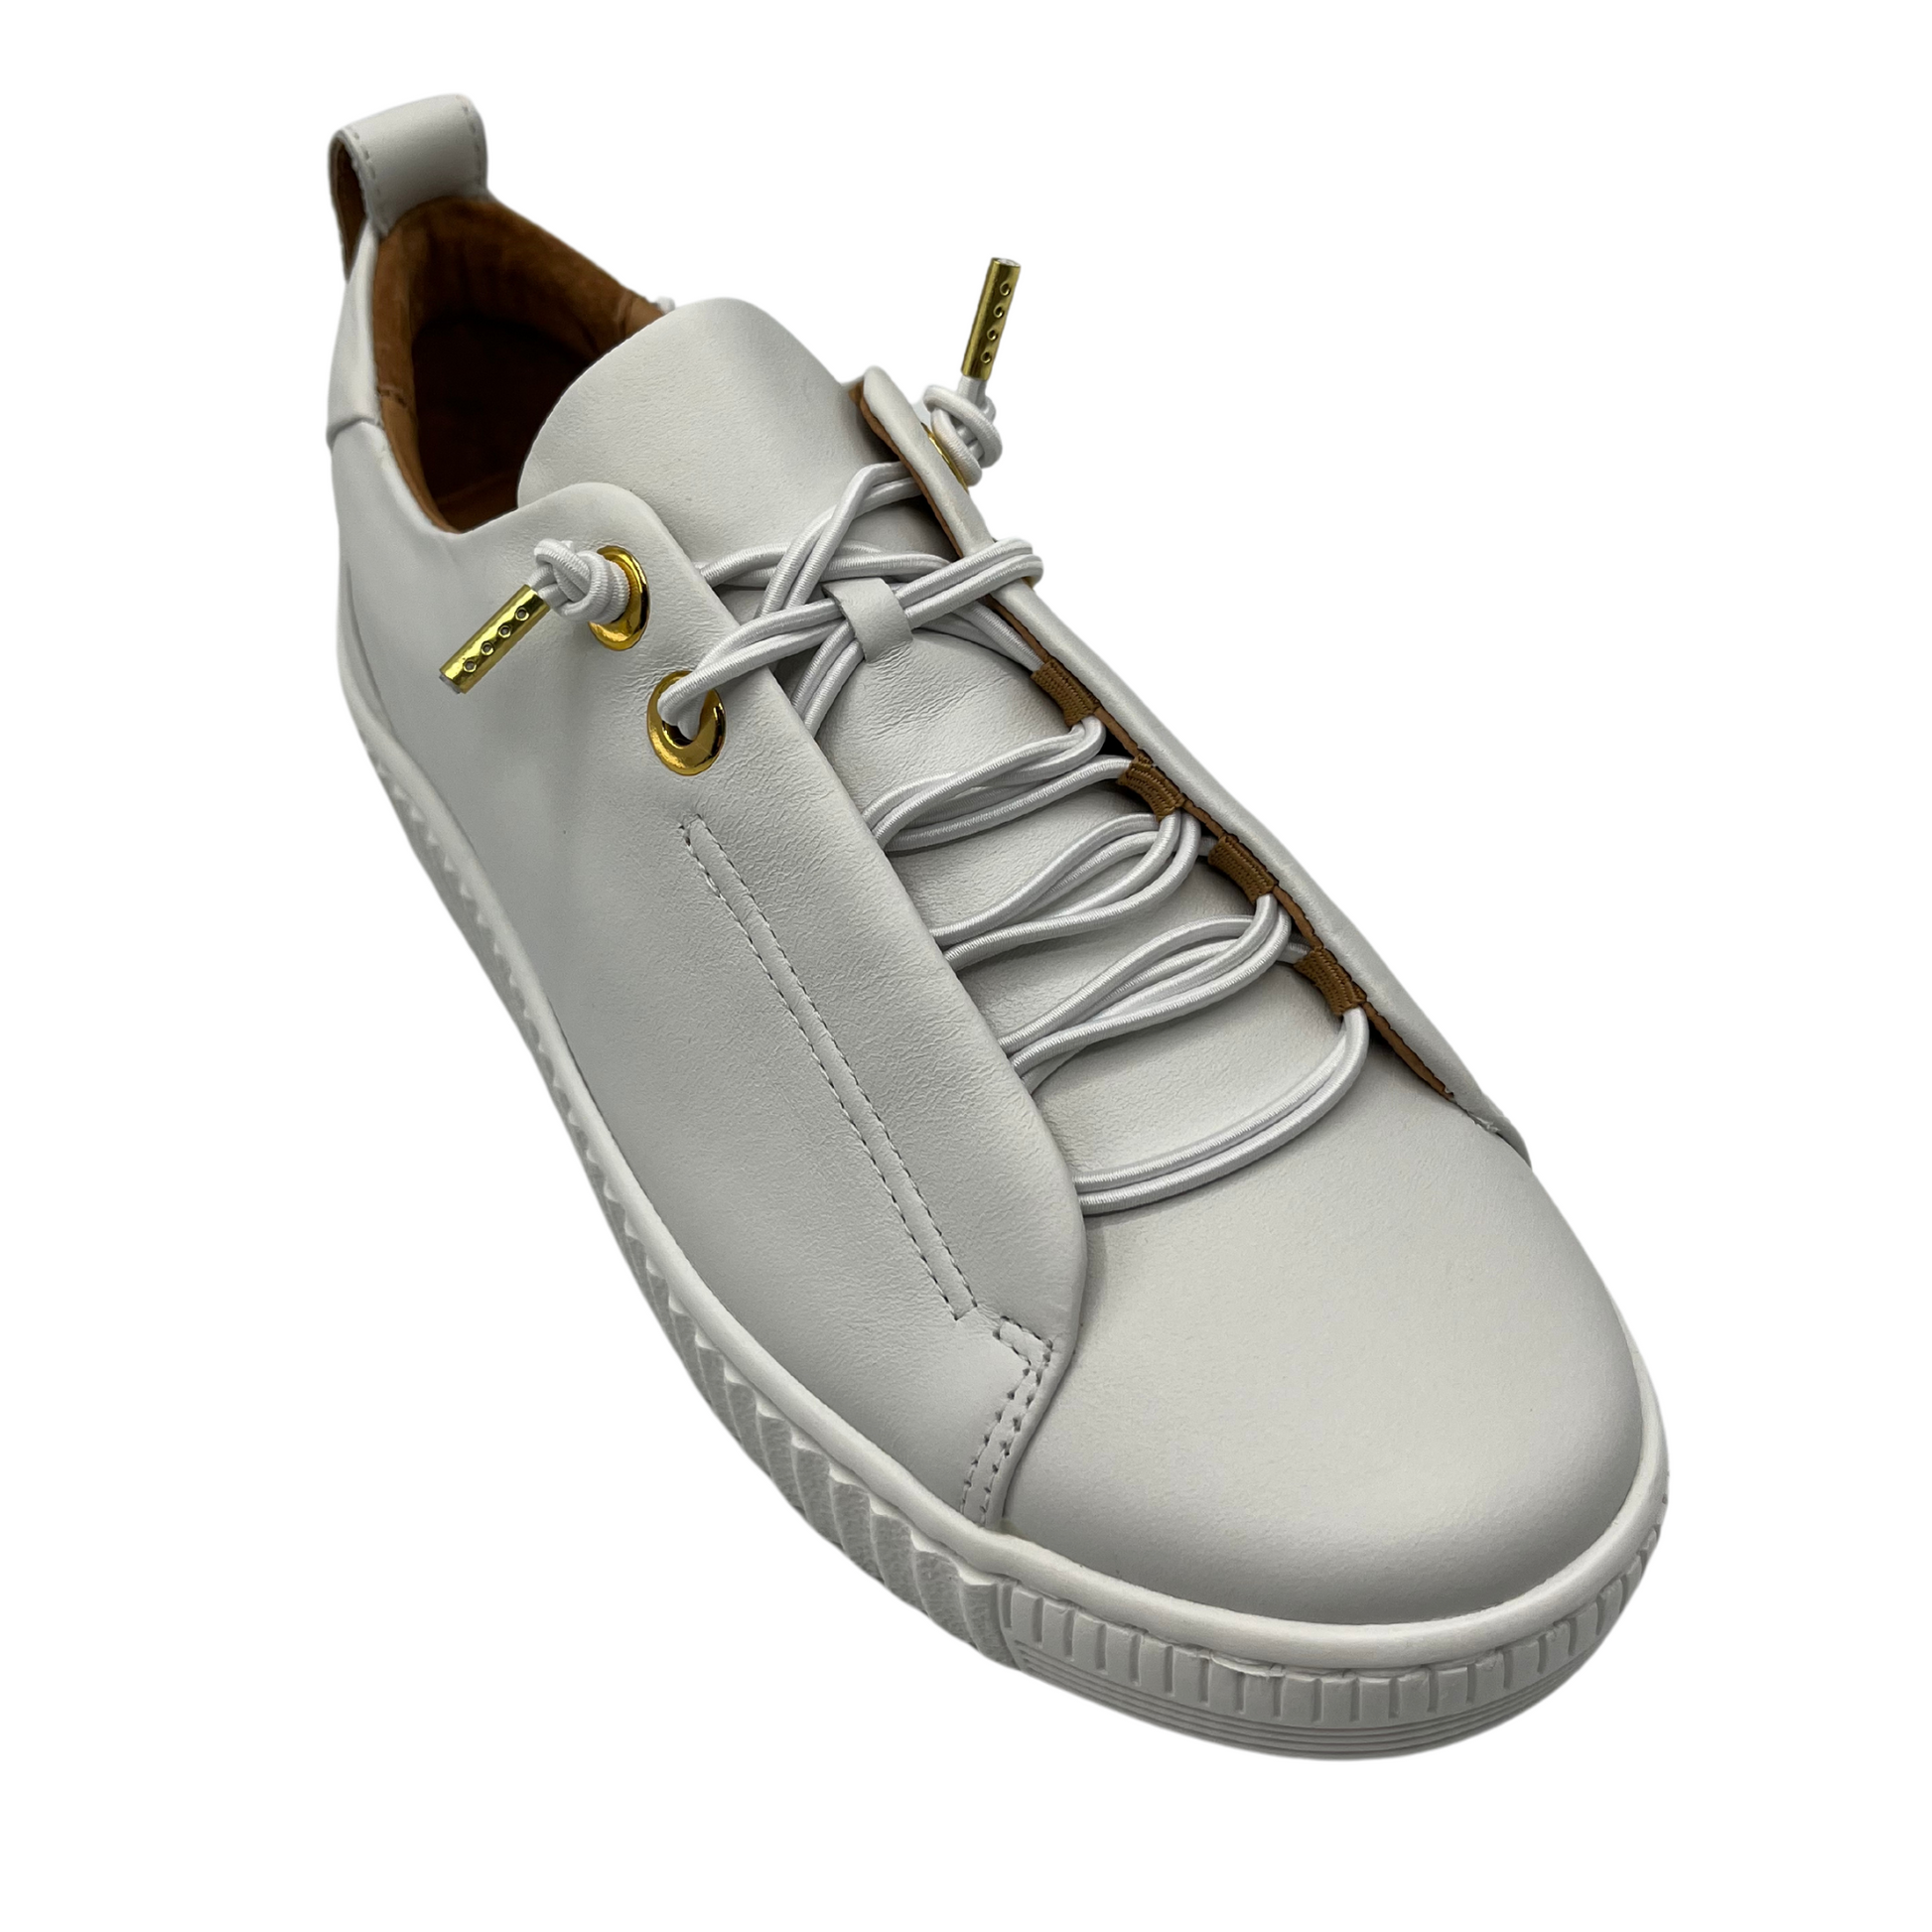 45 degree angled view of white leather sneaker with matching laces with white rubber outsole